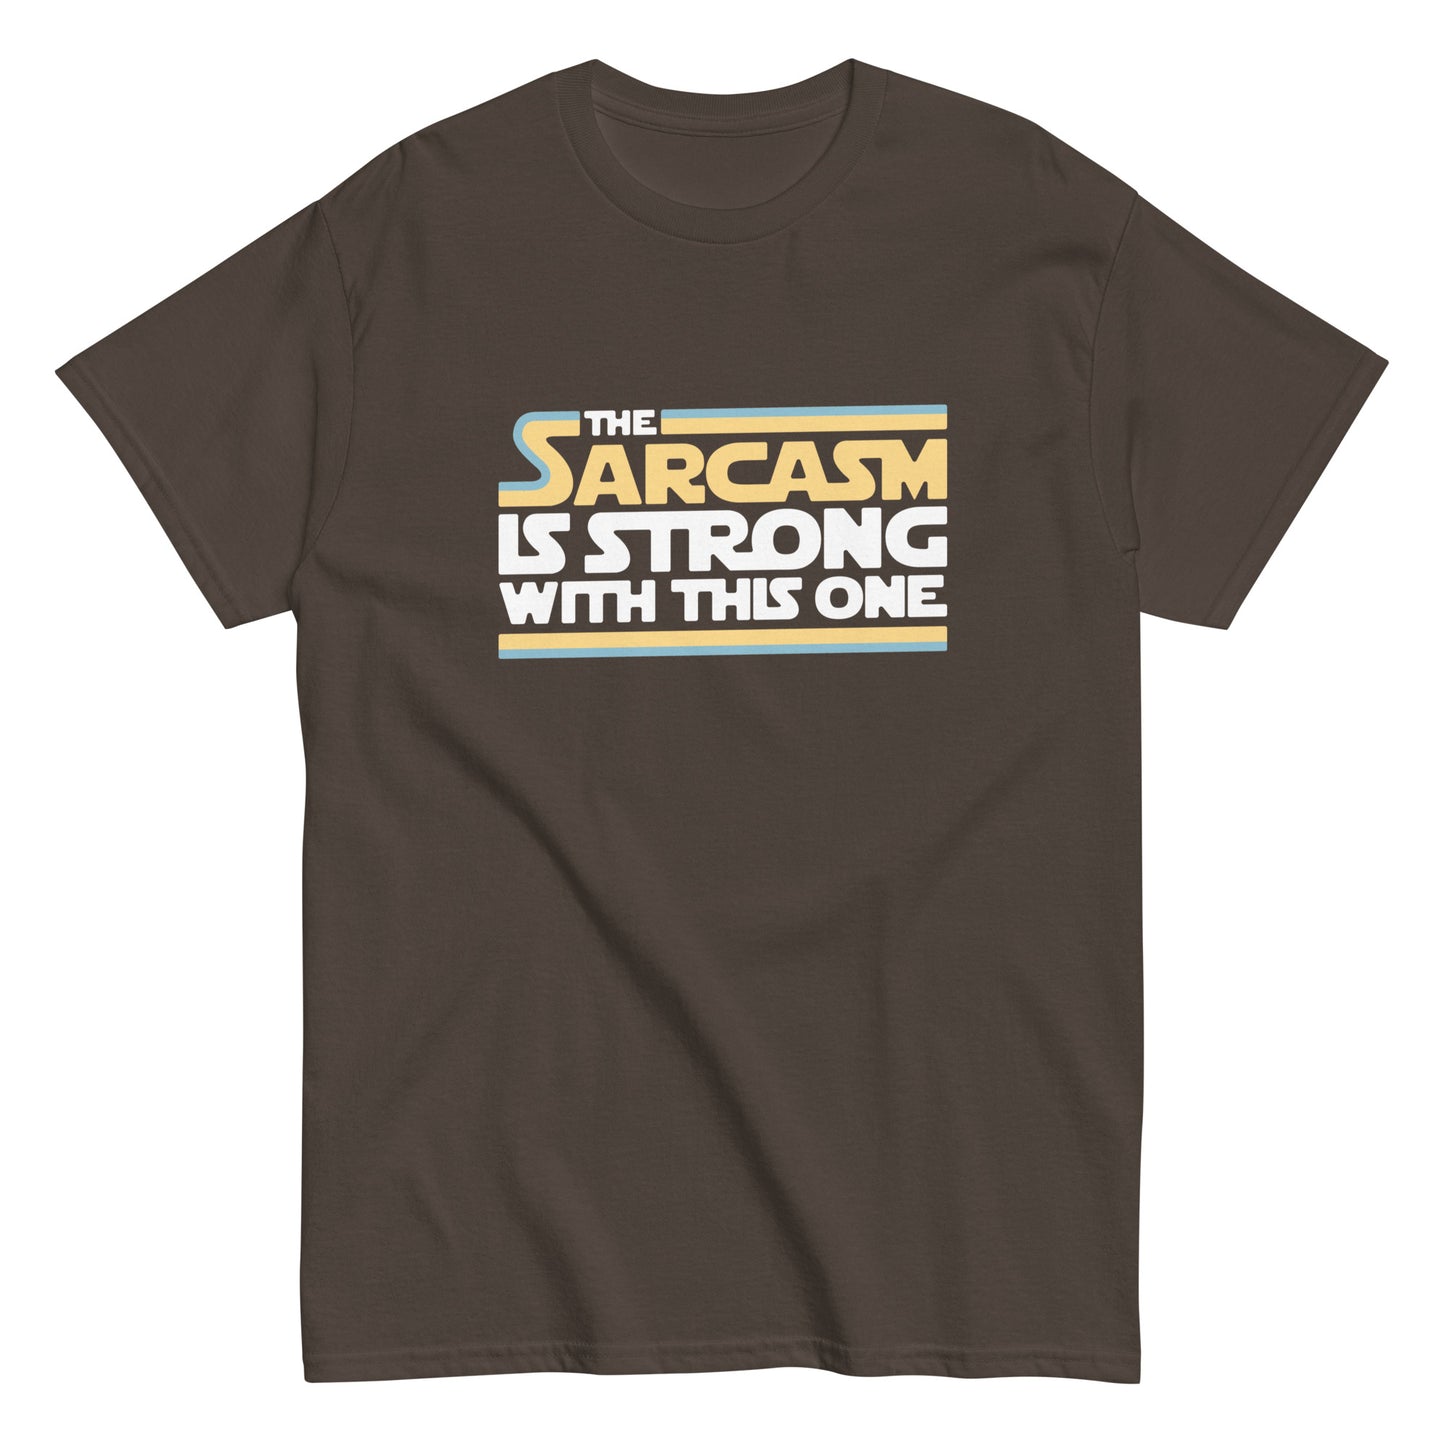 The Sarcasm Is Strong With This One Men's Classic Tee